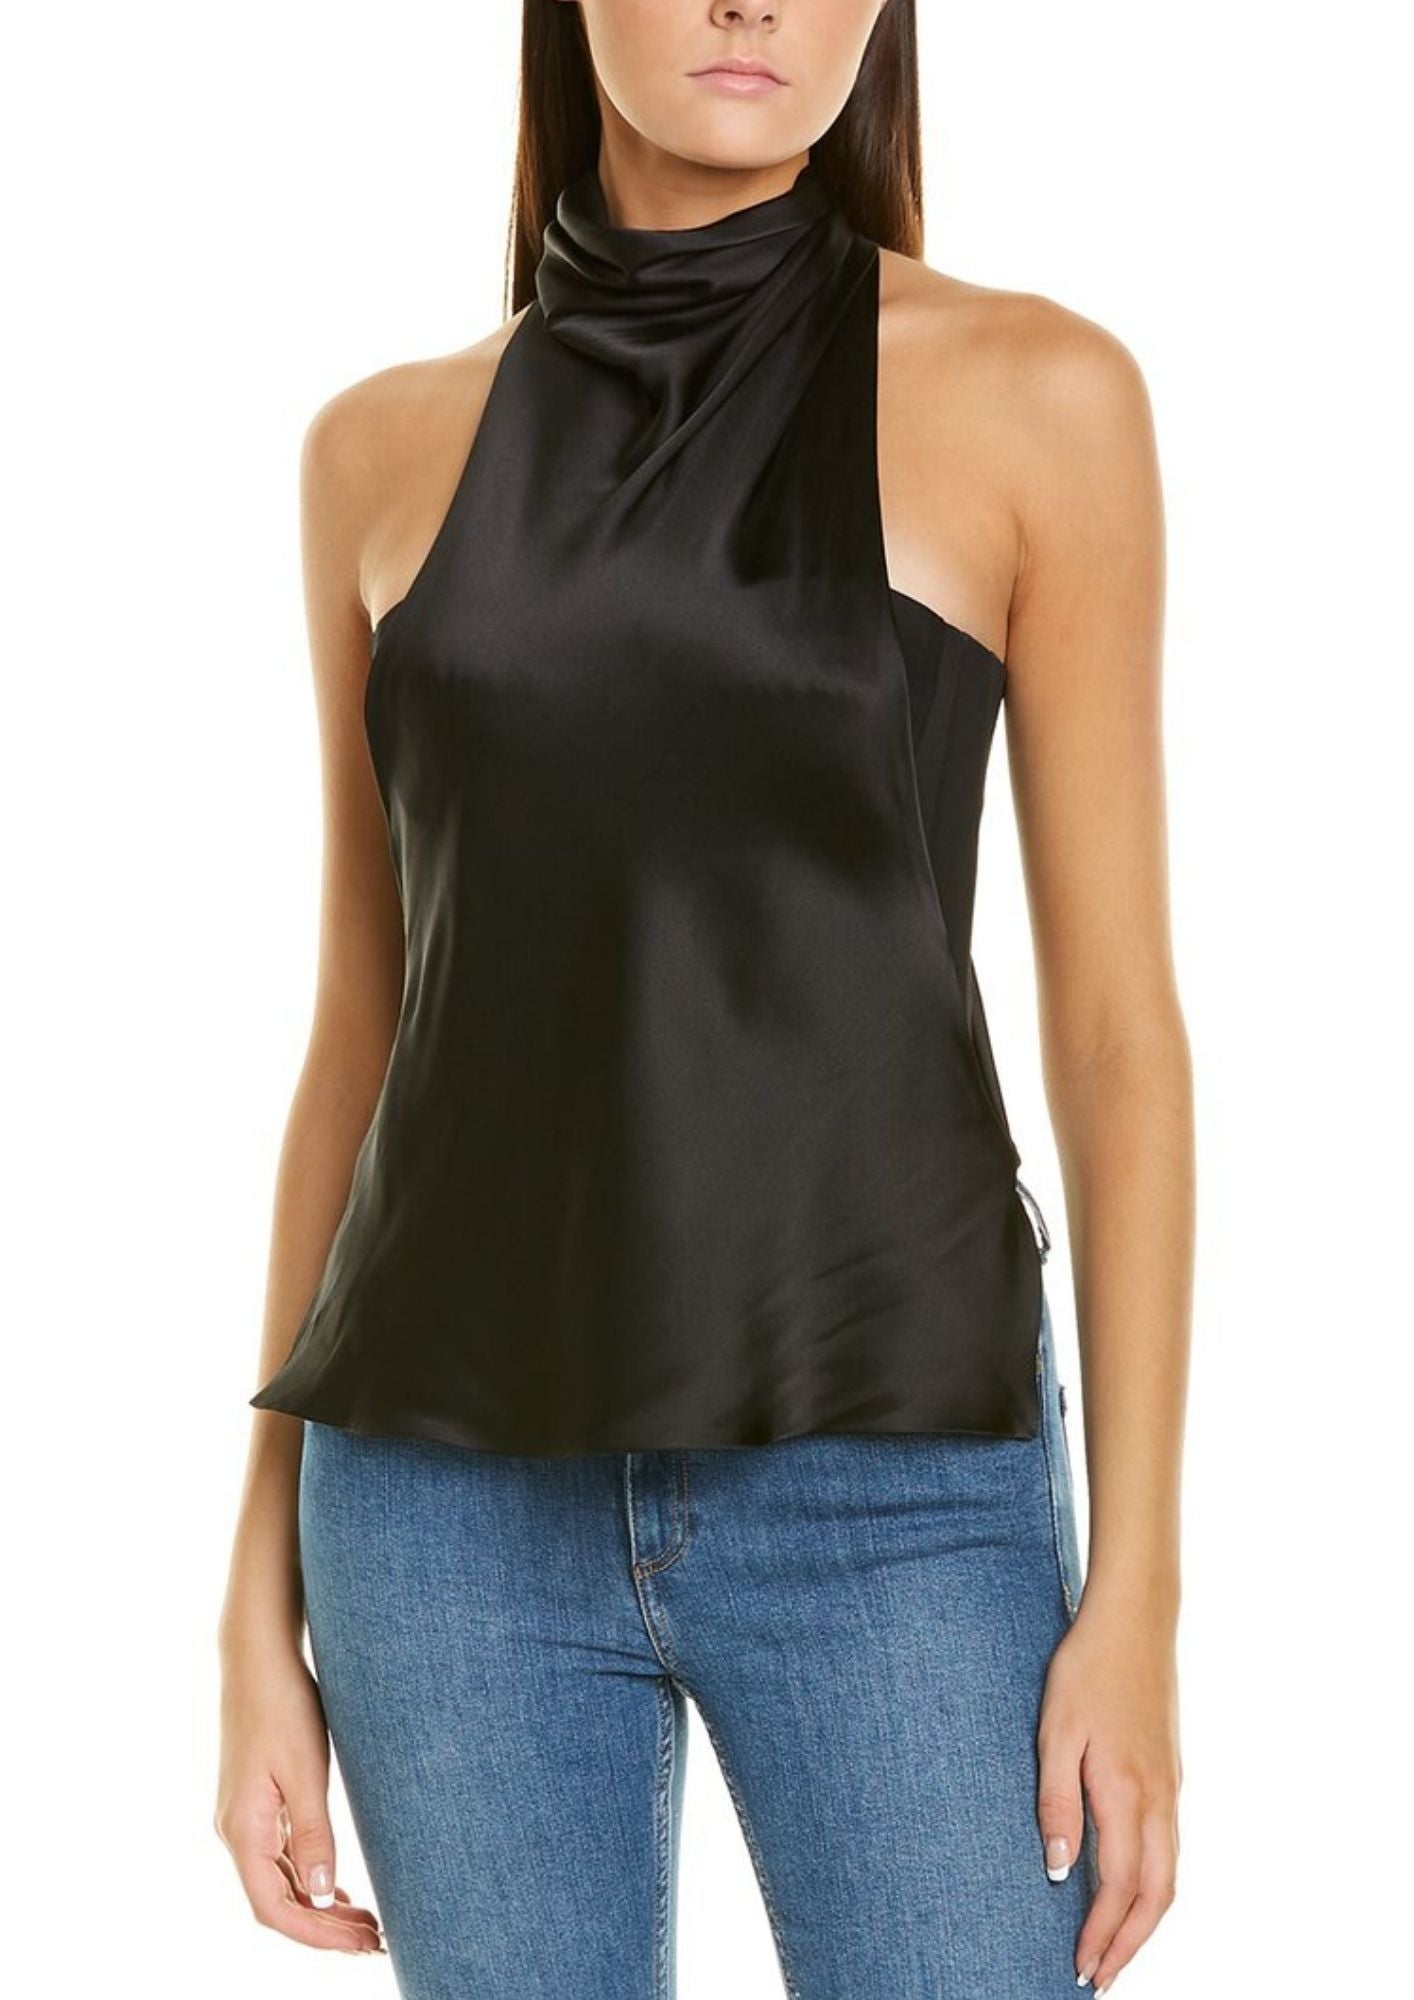 Halter Neck With Cowl Effect Opening At Back Black Top